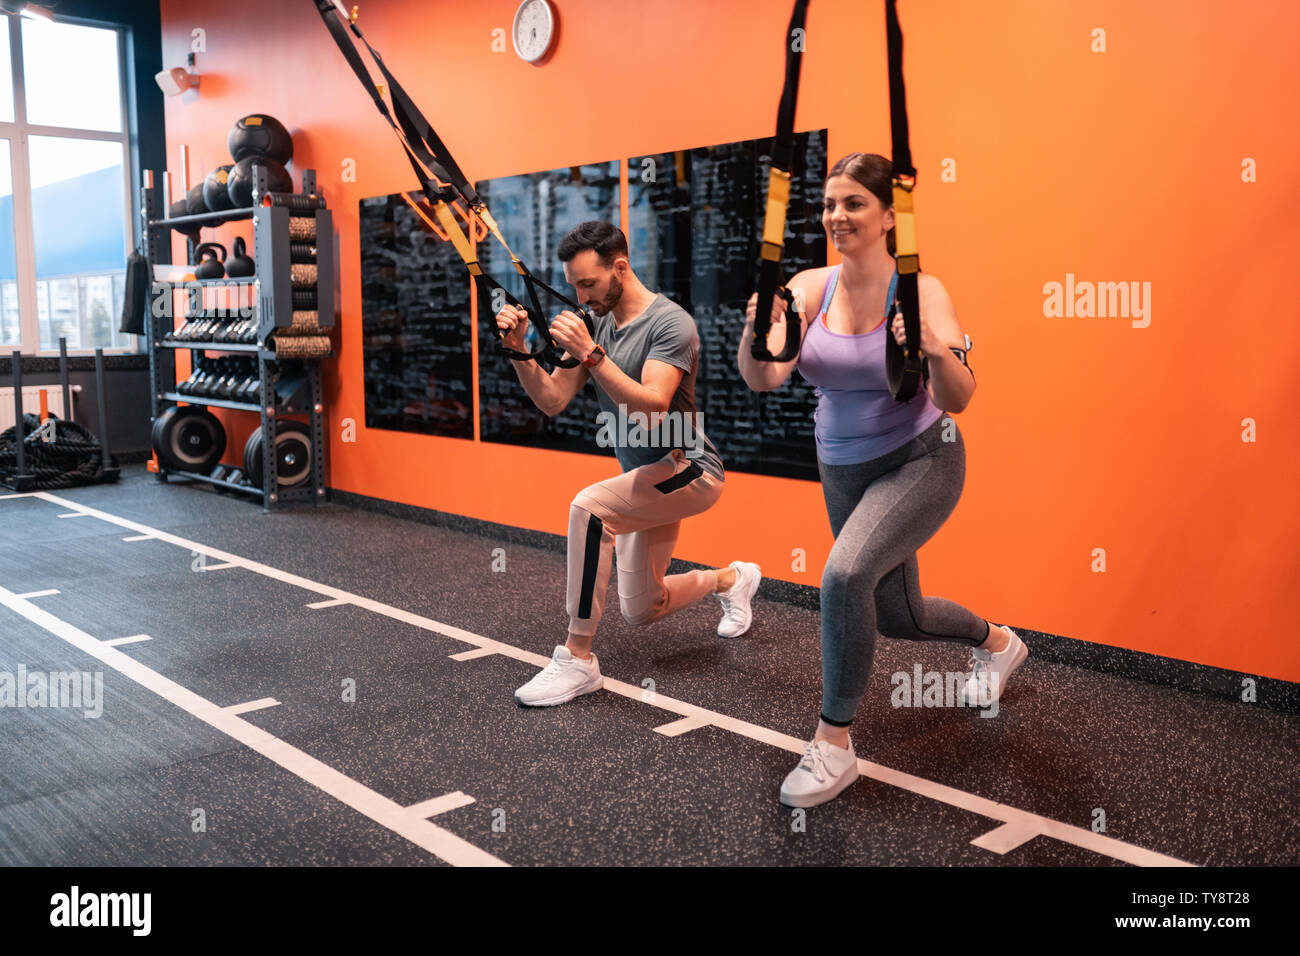 Trainer and his client lunging forward holding TRX straps Stock Photo